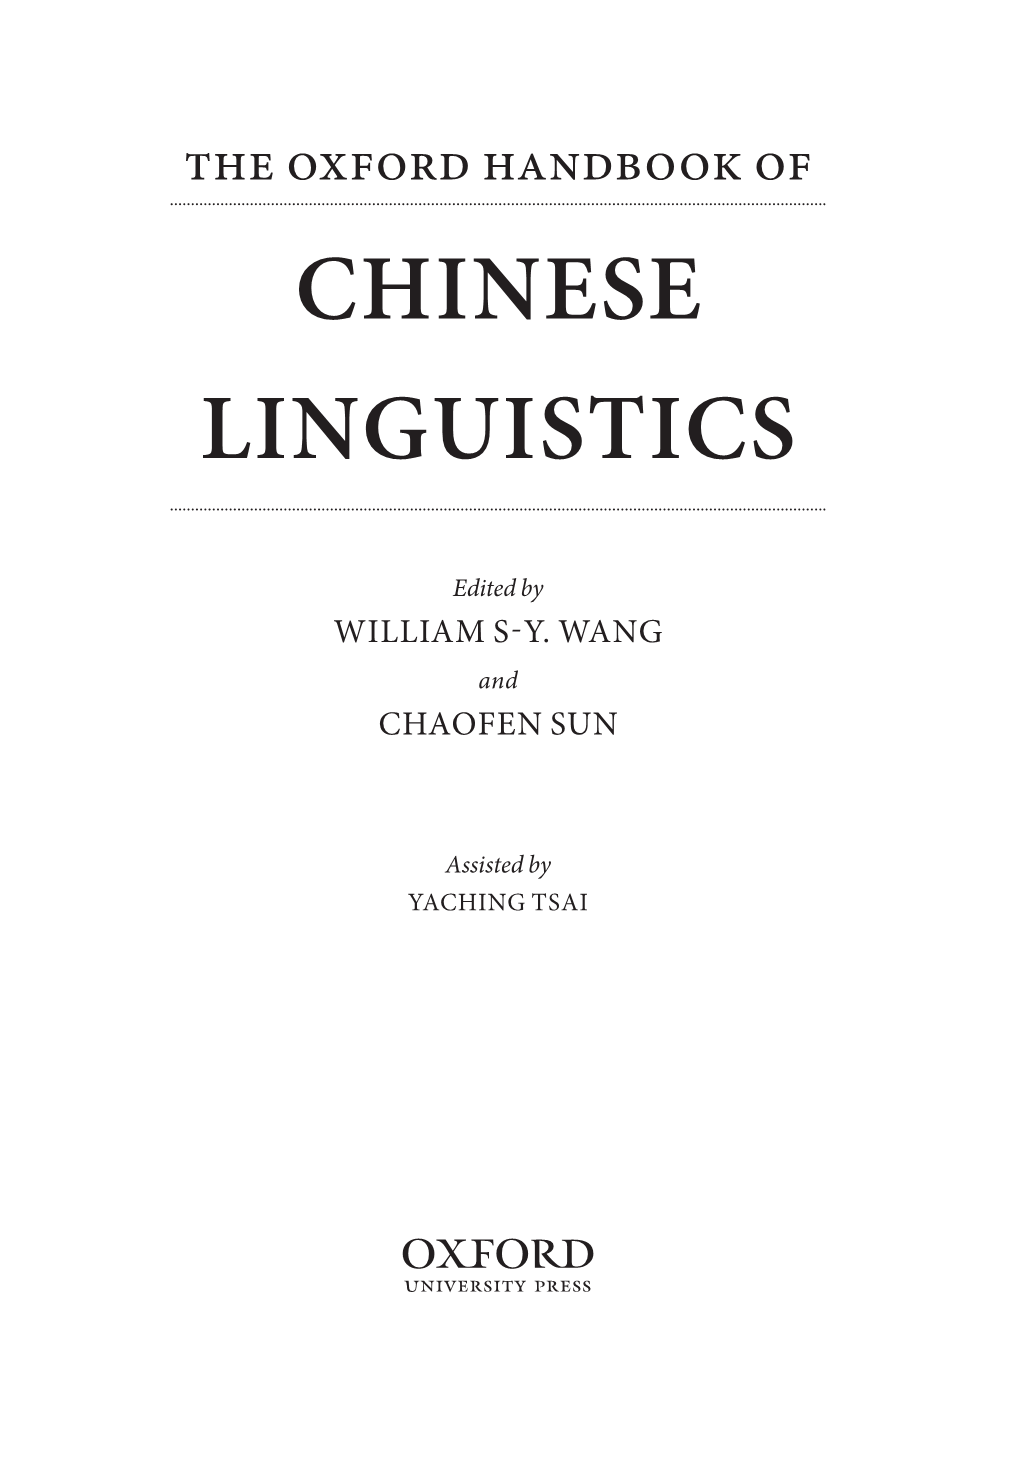 The Oxford Handbook of CHINESE LINGUISTICS